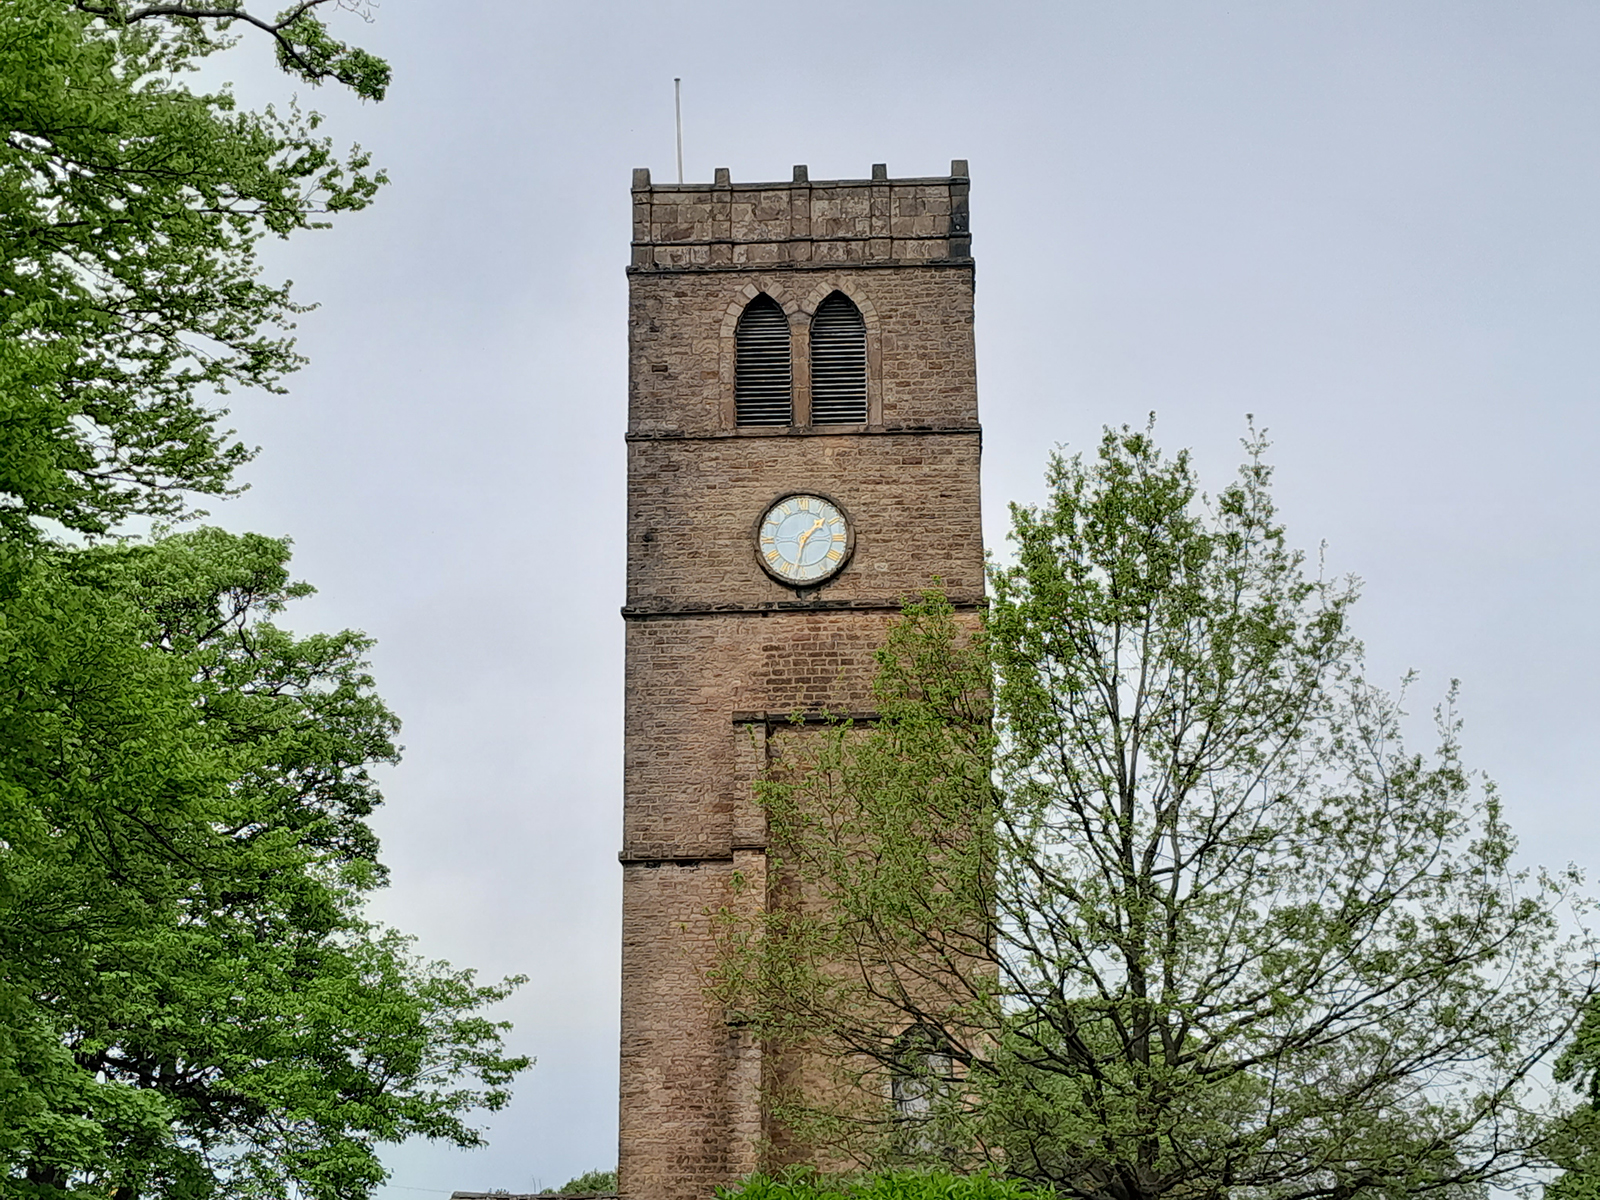 Samsung Galaxy A13 camera sample showing a church tower close up in the day